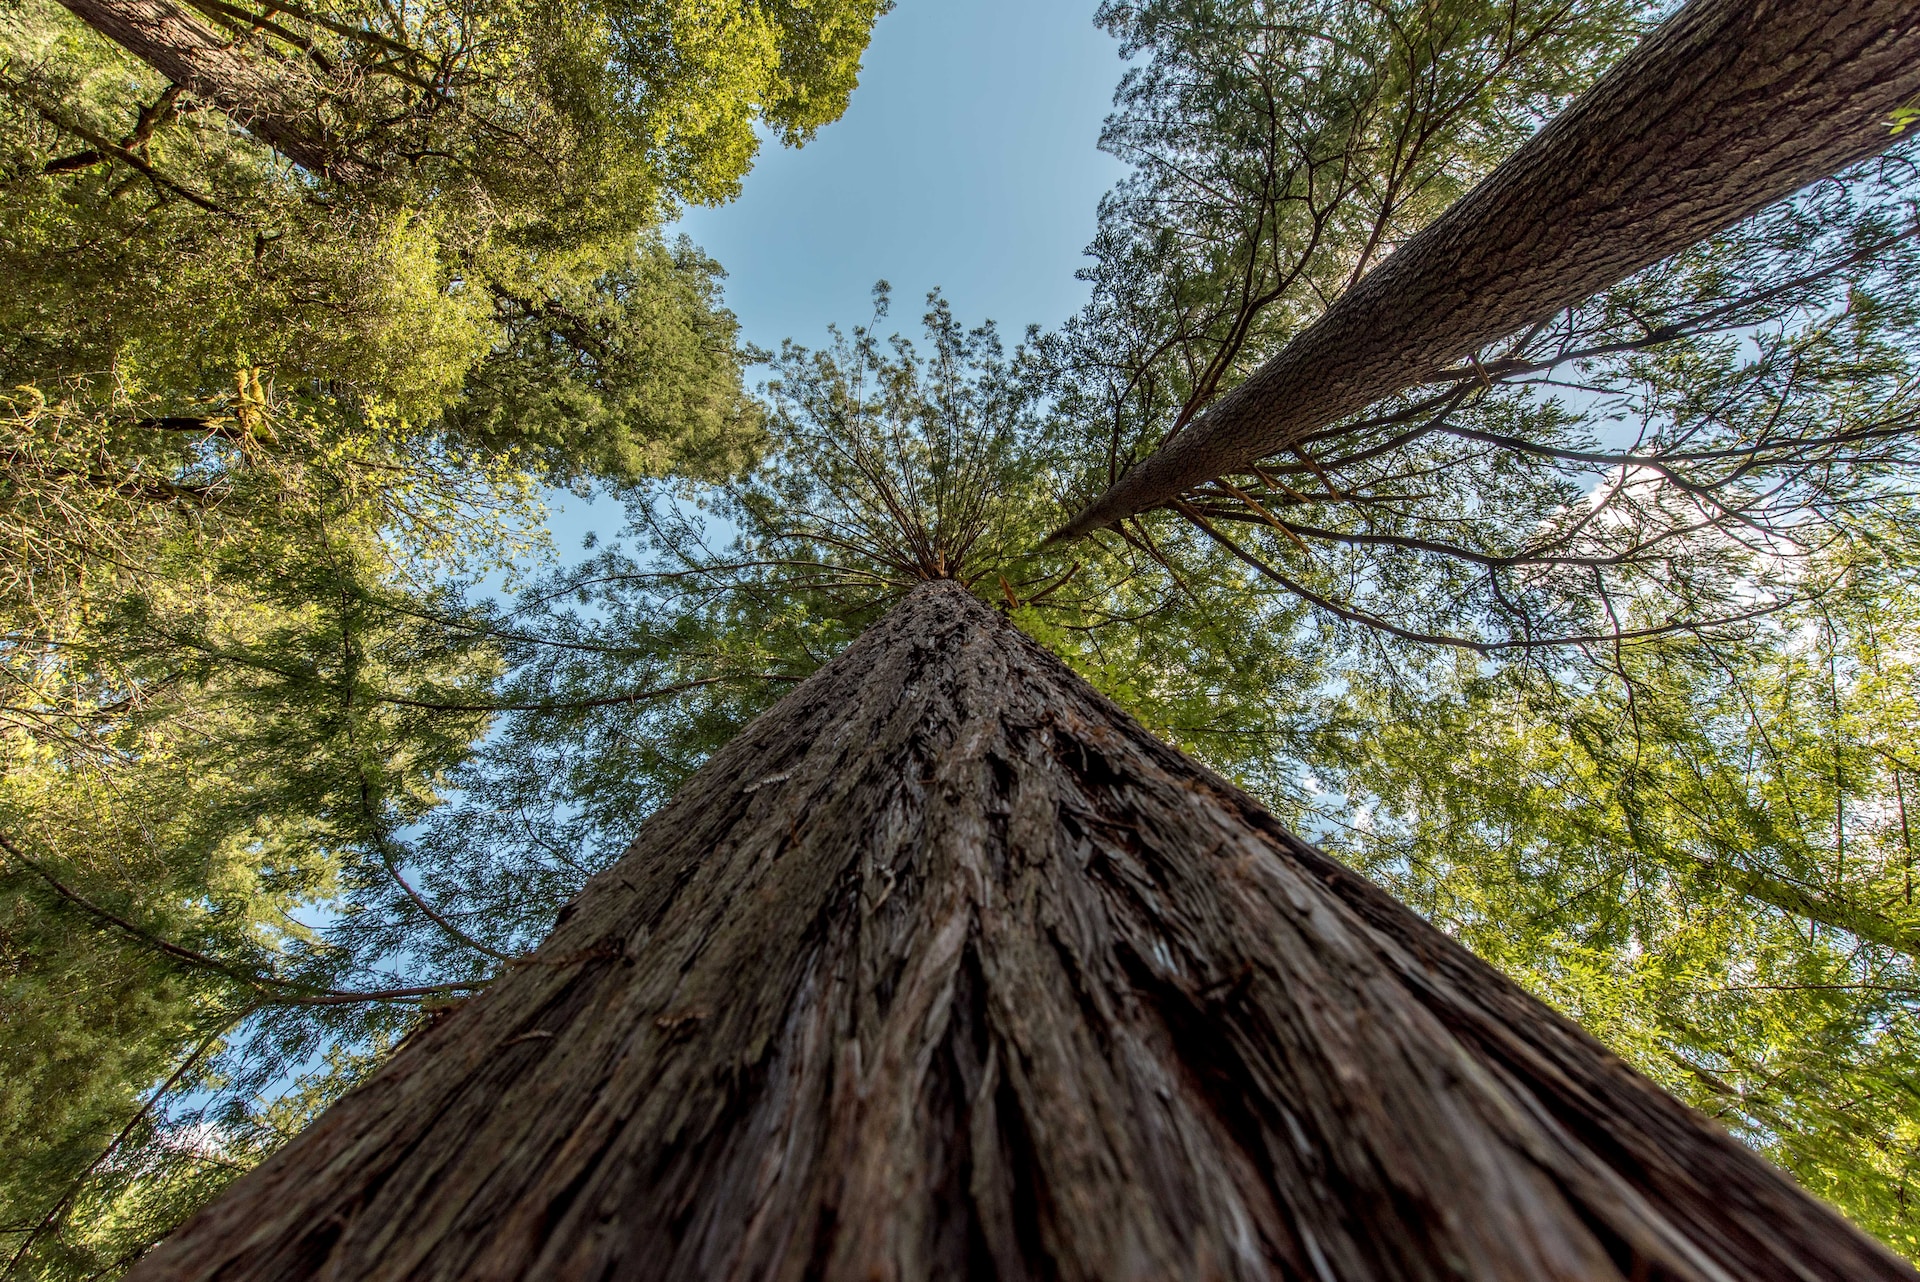 View of the top of a redwood tree from the bottom